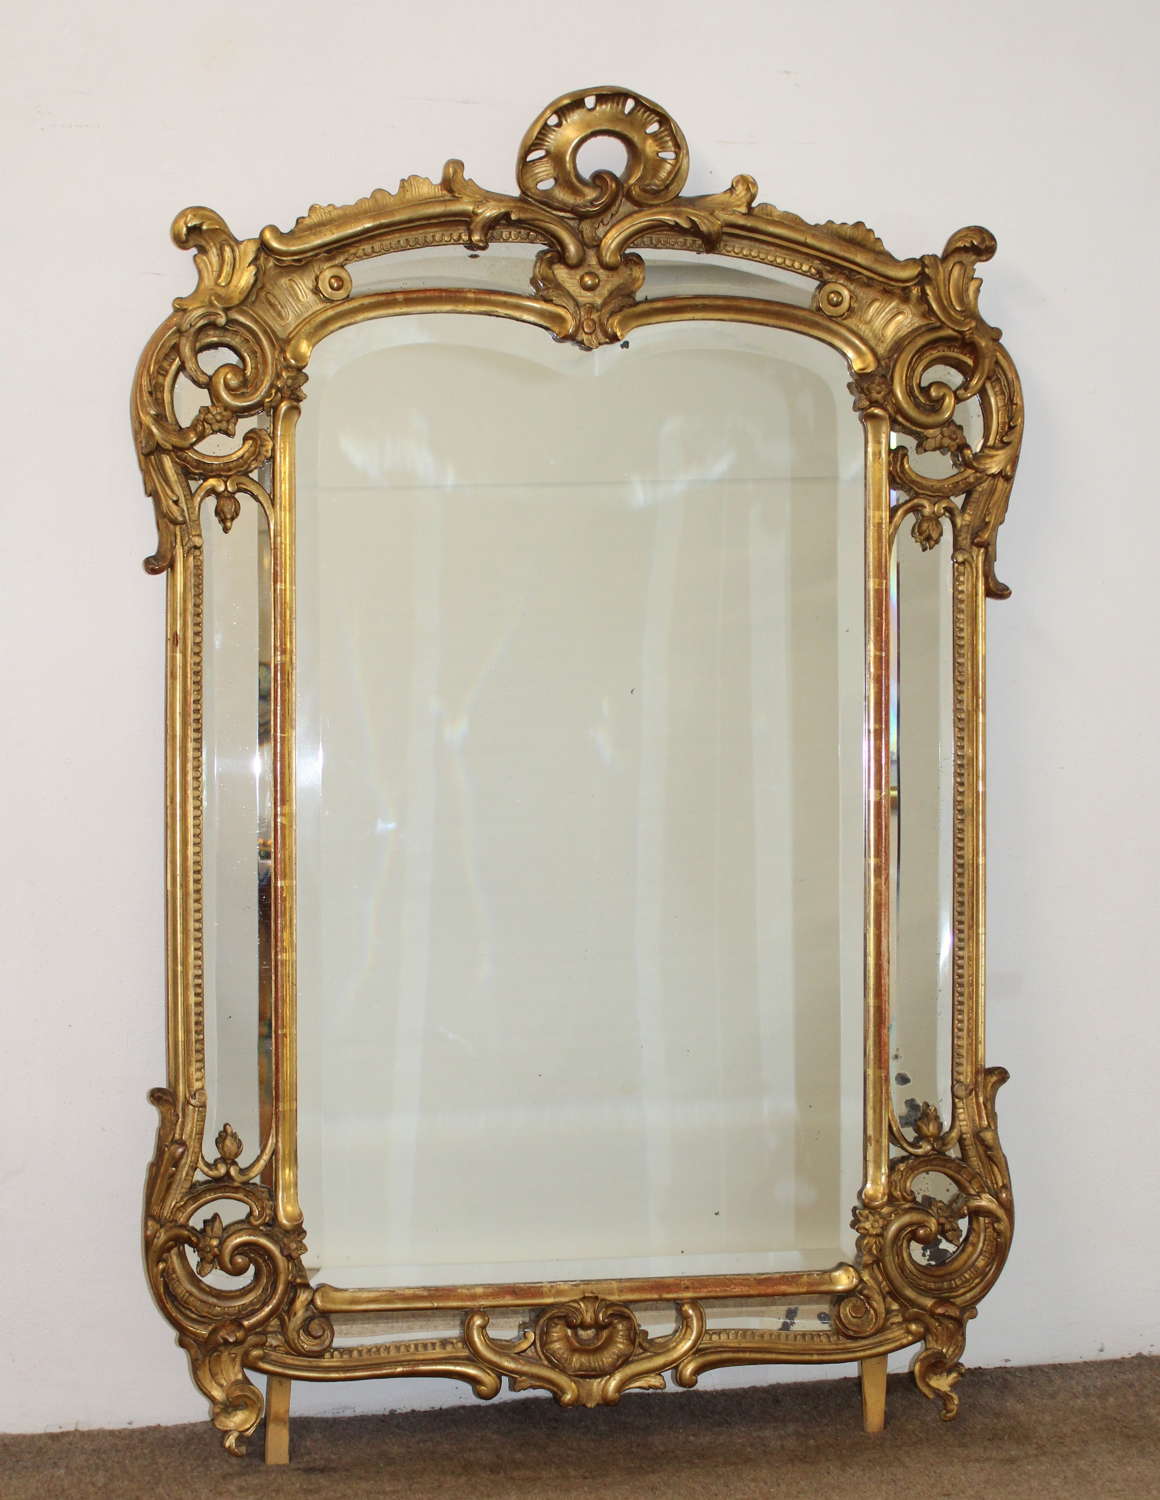 Curvy antique French margin mirror with bevelled glass